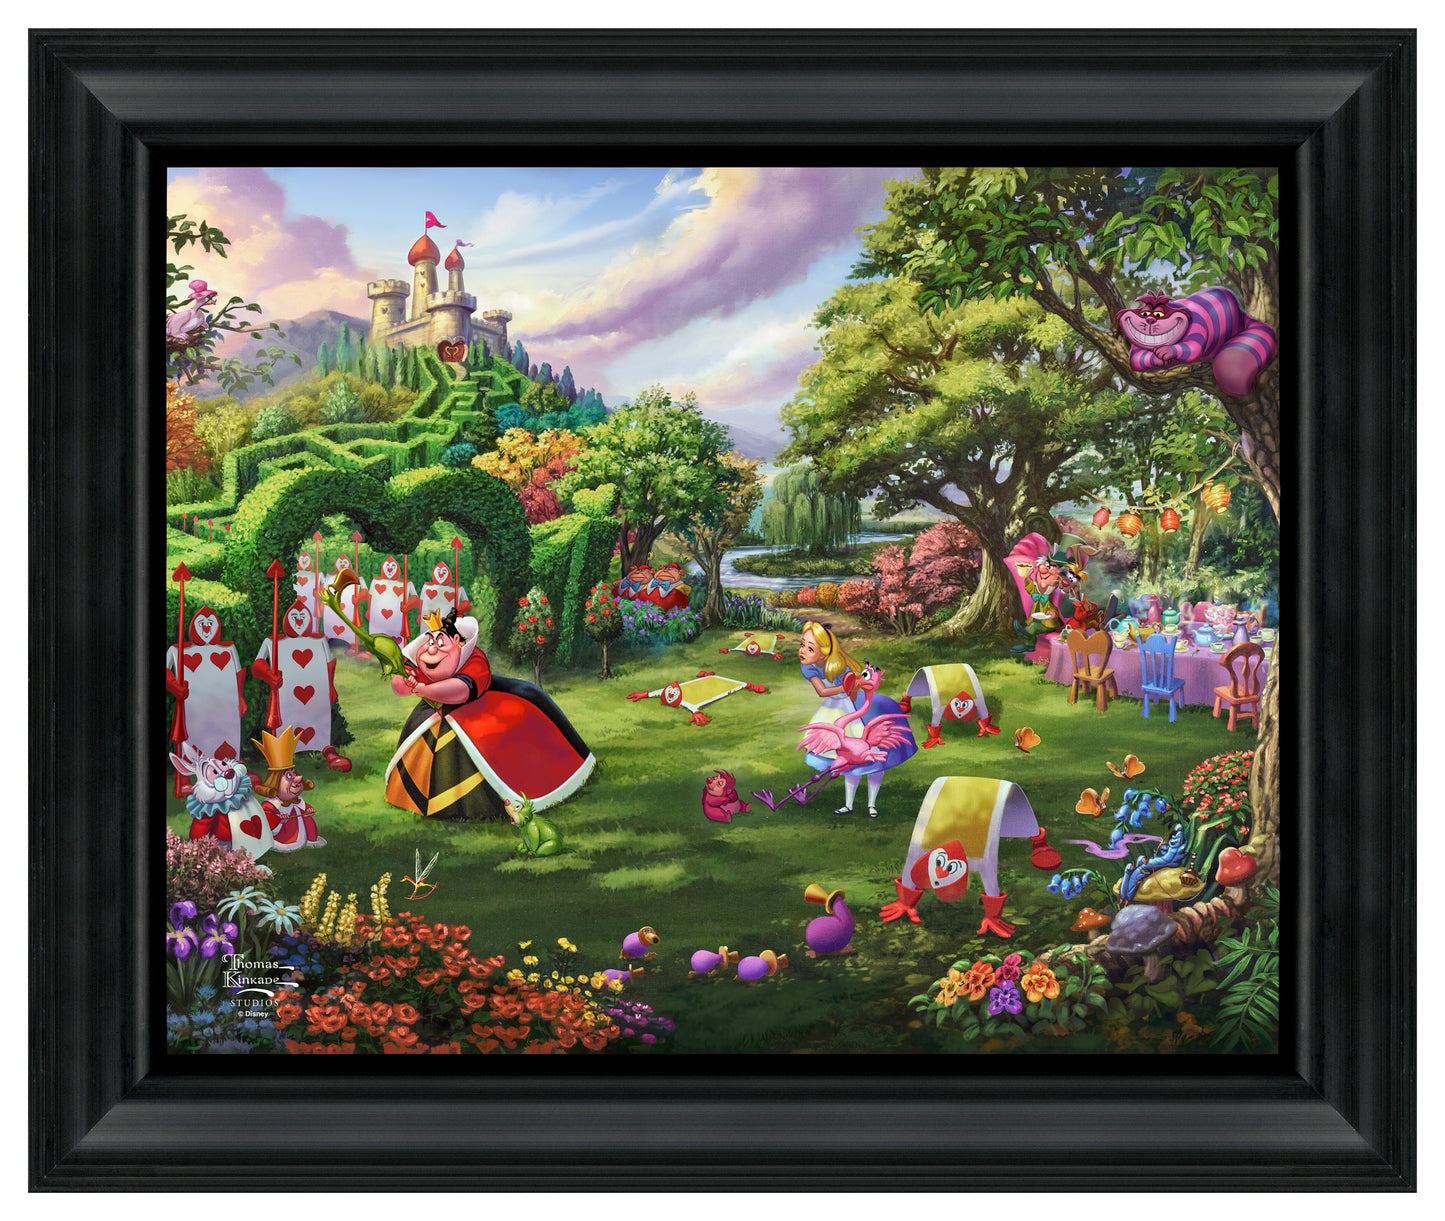 The Queen of Hearts is playing croquet with flamingo mallets and hedgehog balls, while the White Rabbit and Alice look on.